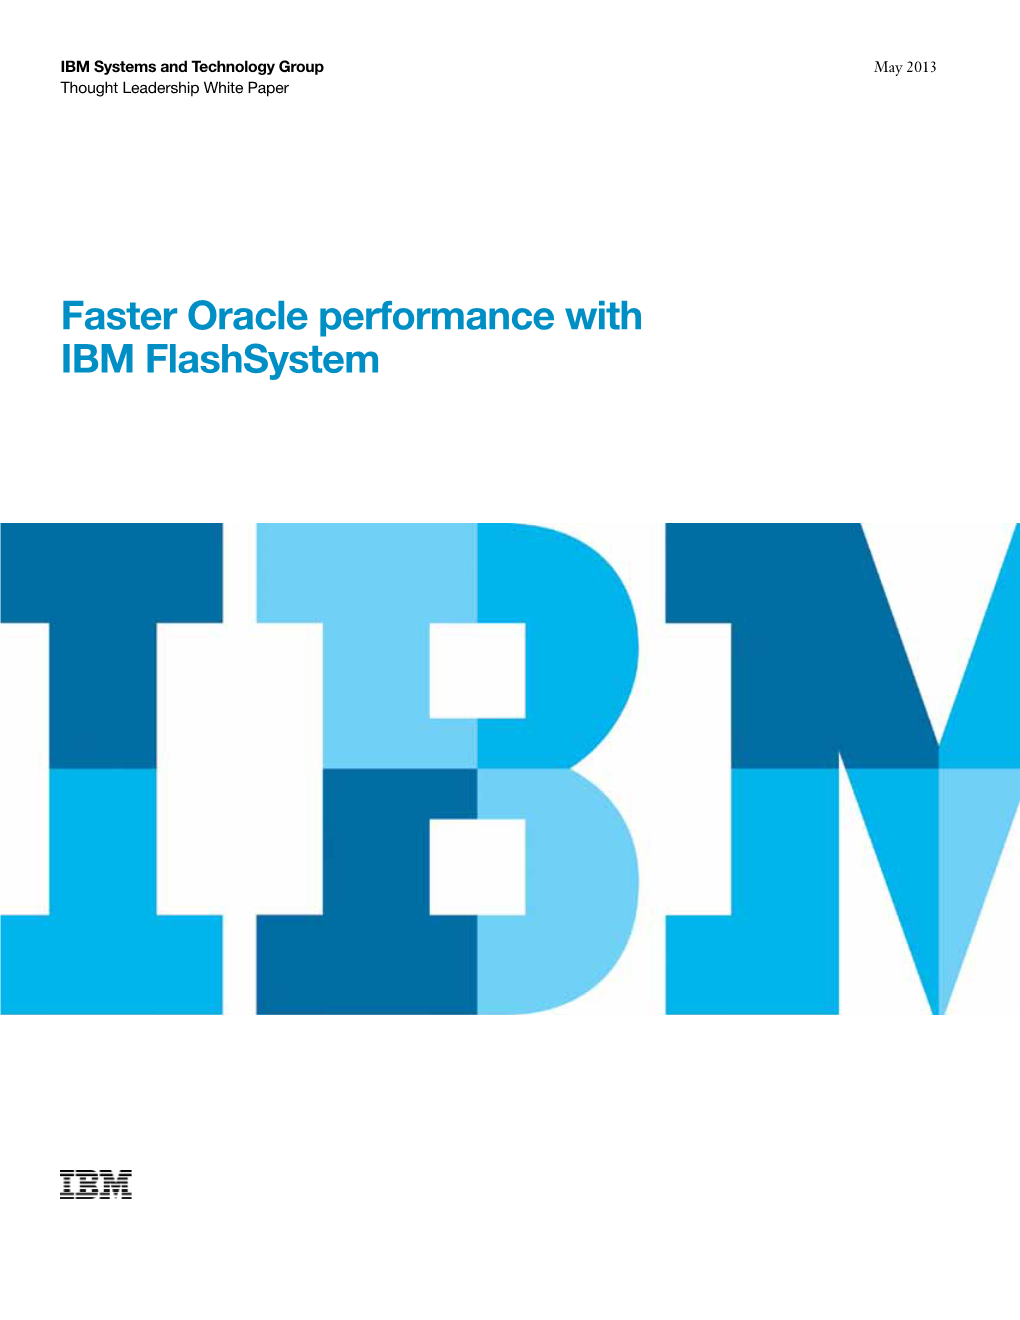 Faster Oracle Performance with IBM Flashsystem 2 Faster Oracle Performance with IBM Flashsystem